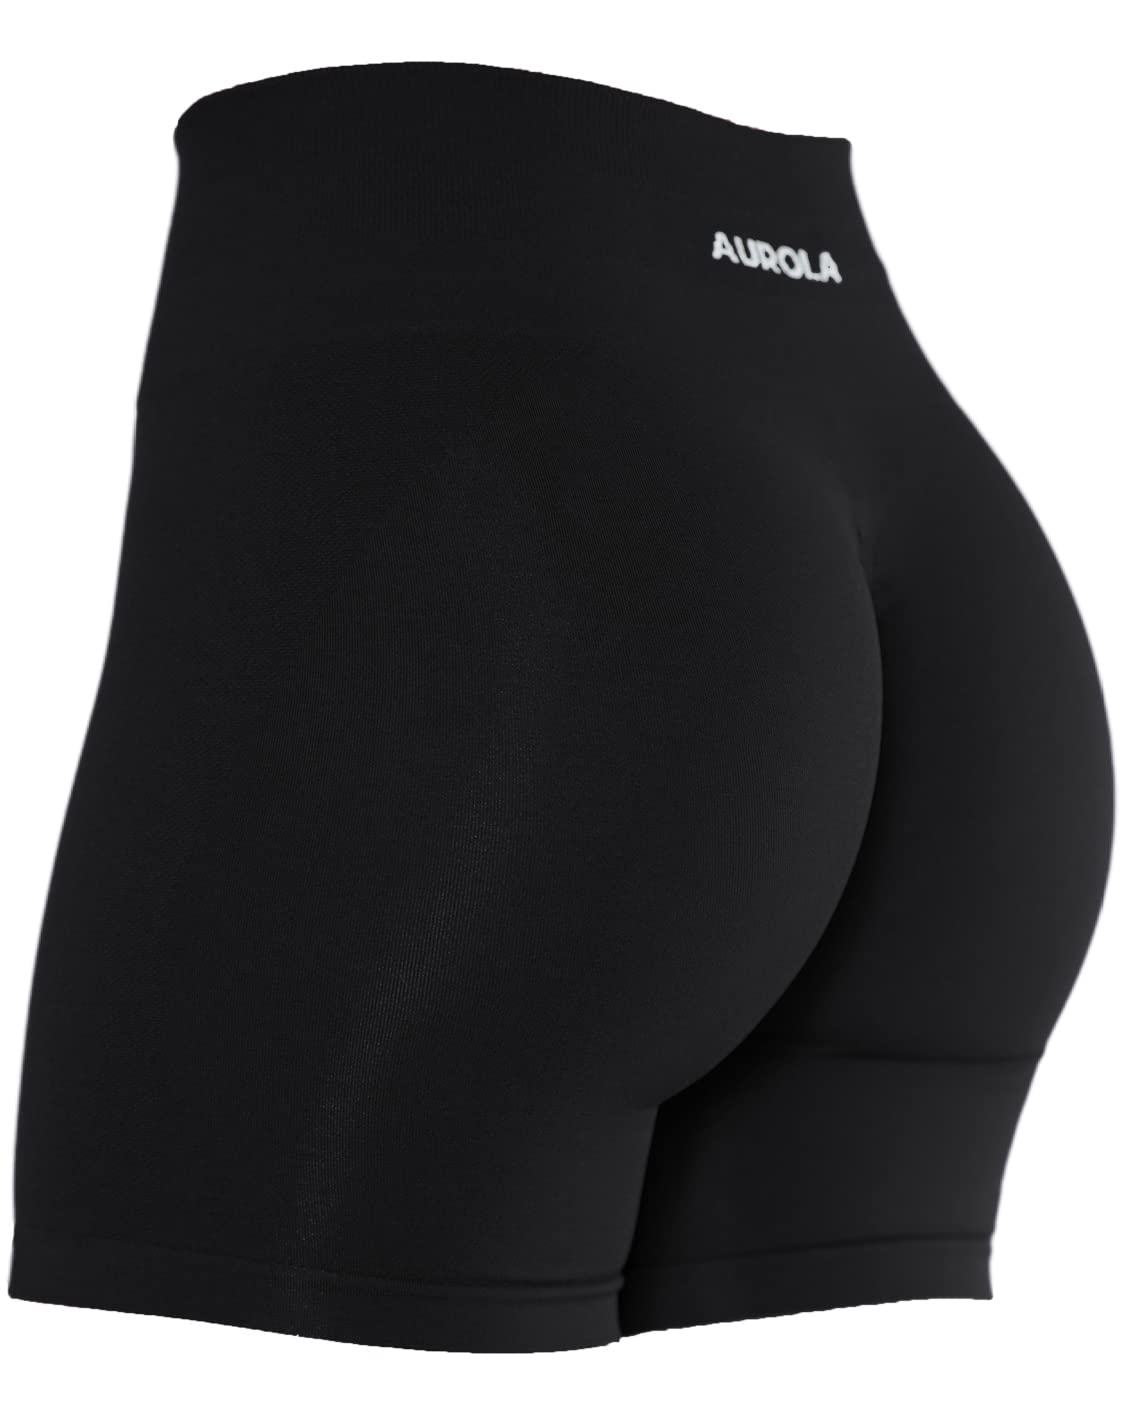 AUROLA Intensify Workout Shorts for Women Seamless Scrunch Short Gym Yoga  Running Sport Active Exercise Fitness Shorts in Saudi Arabia